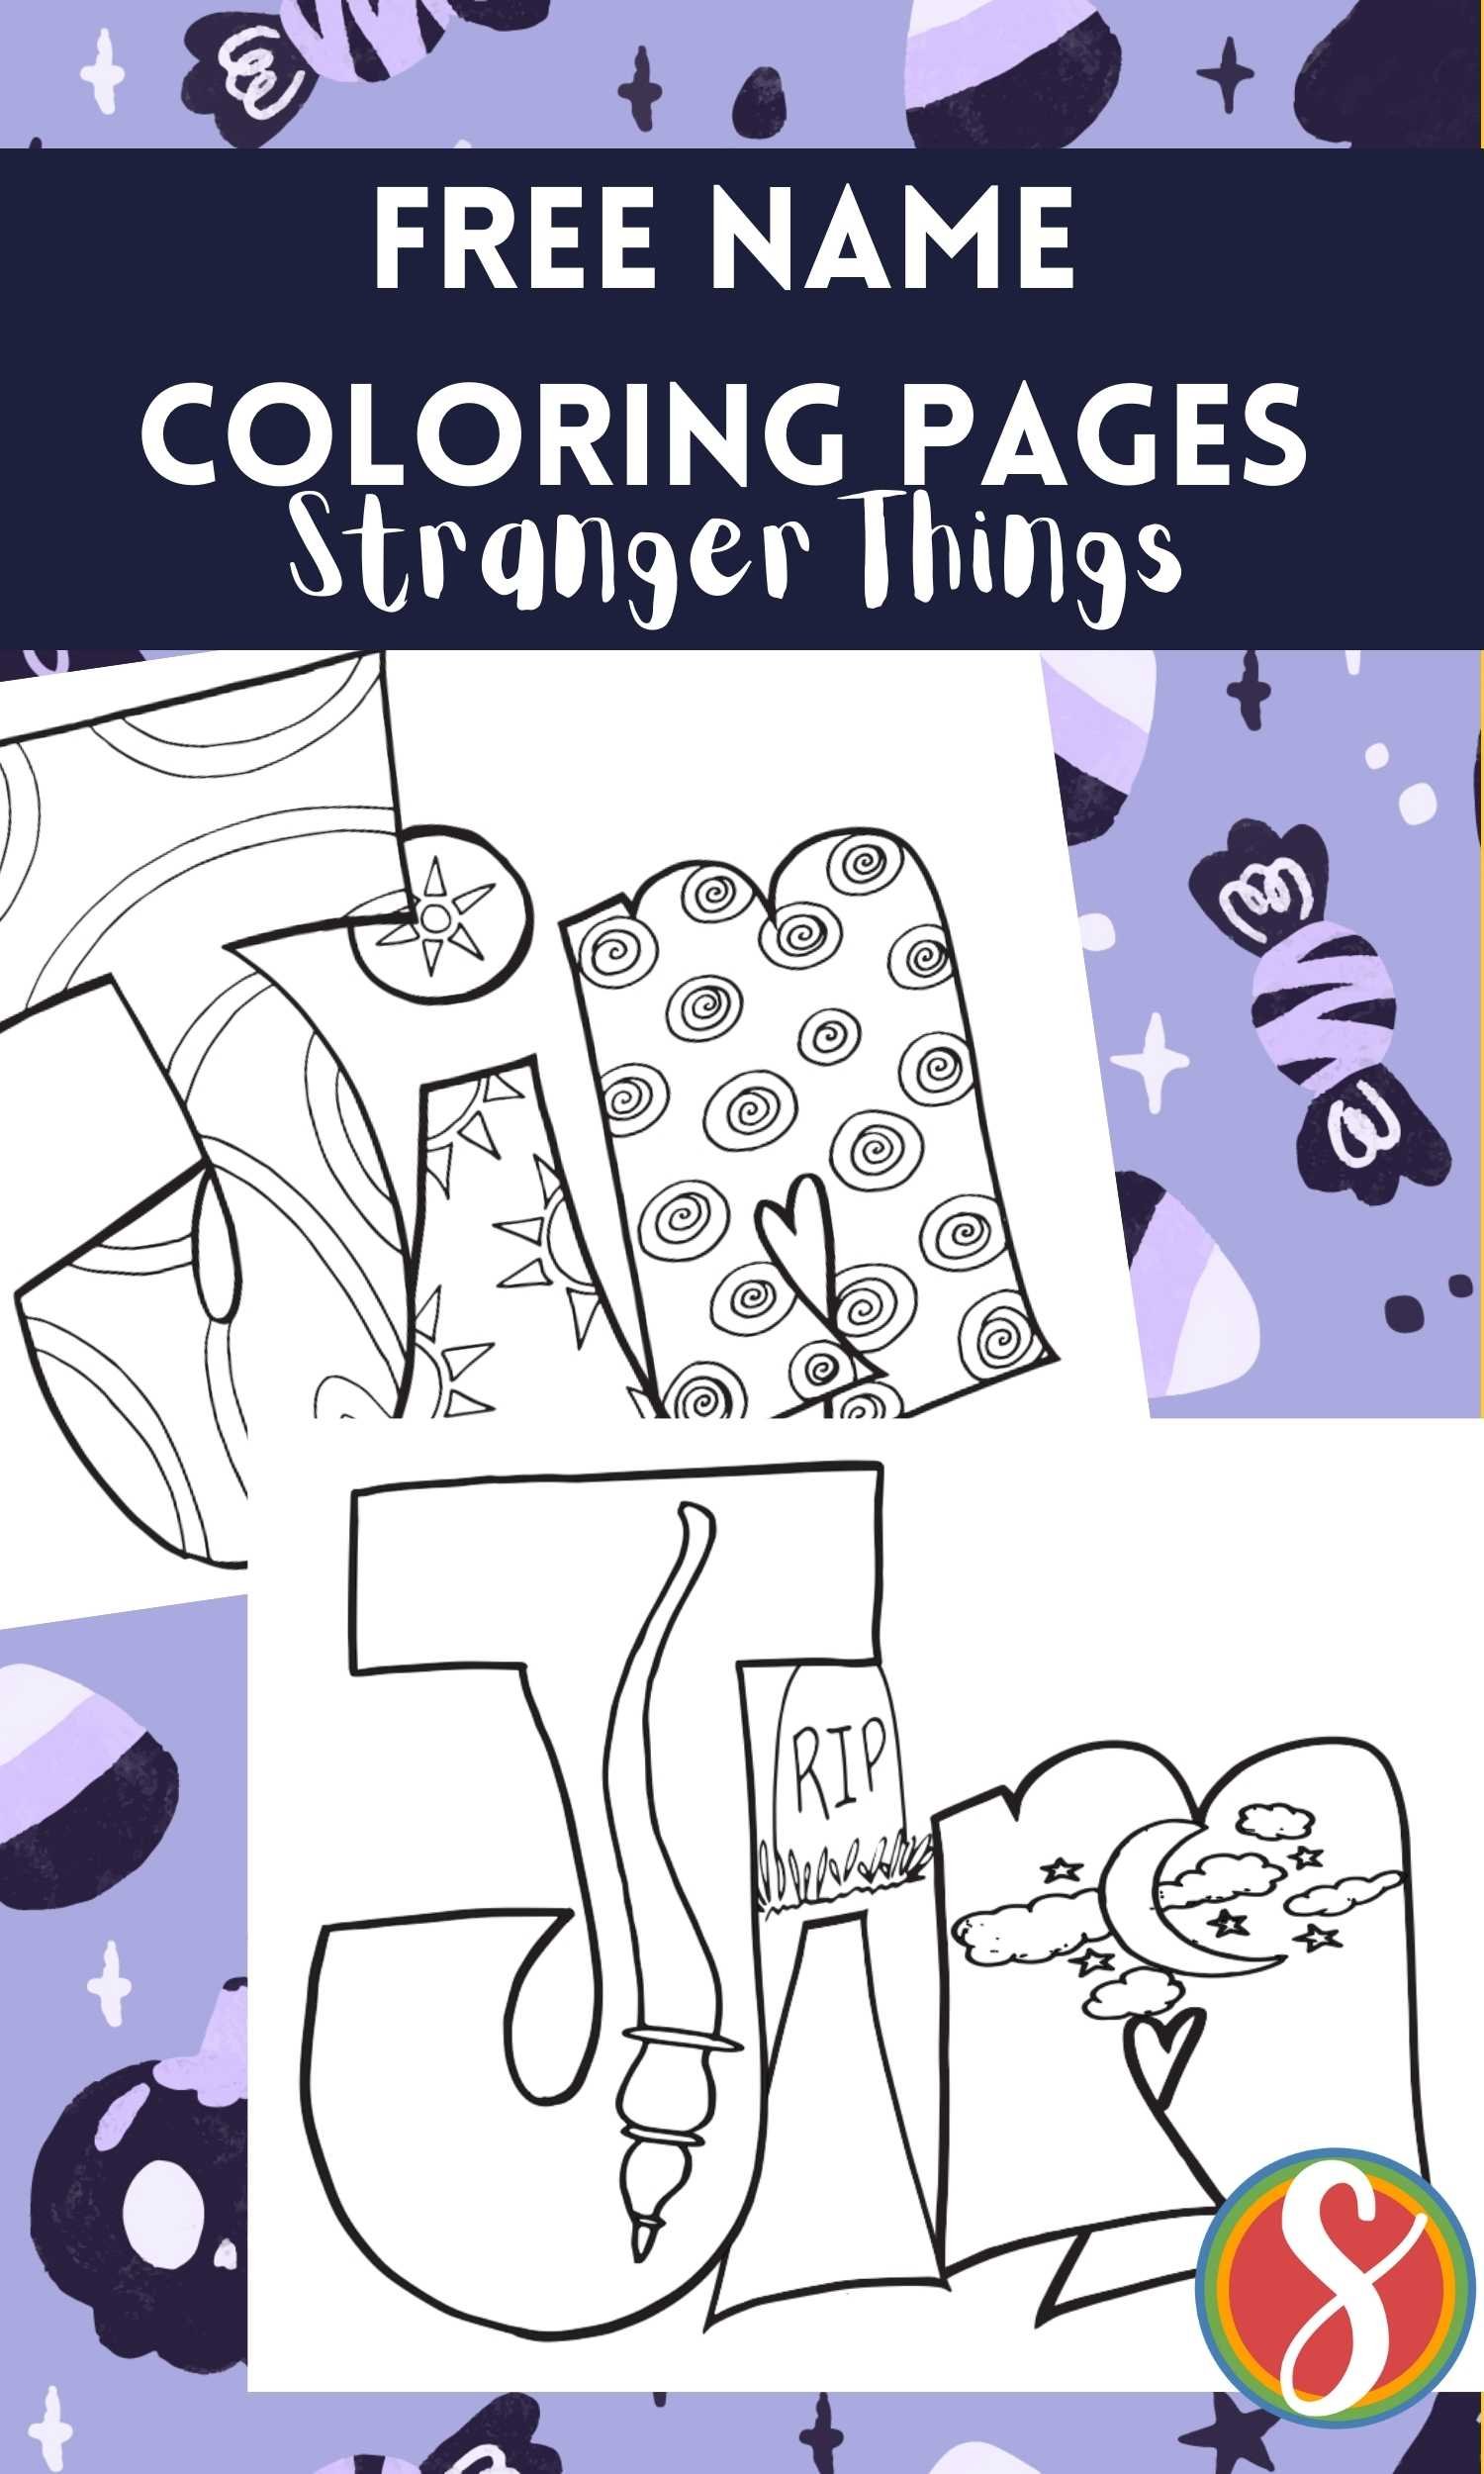 Stranger things coloring pages names â stevie doodles